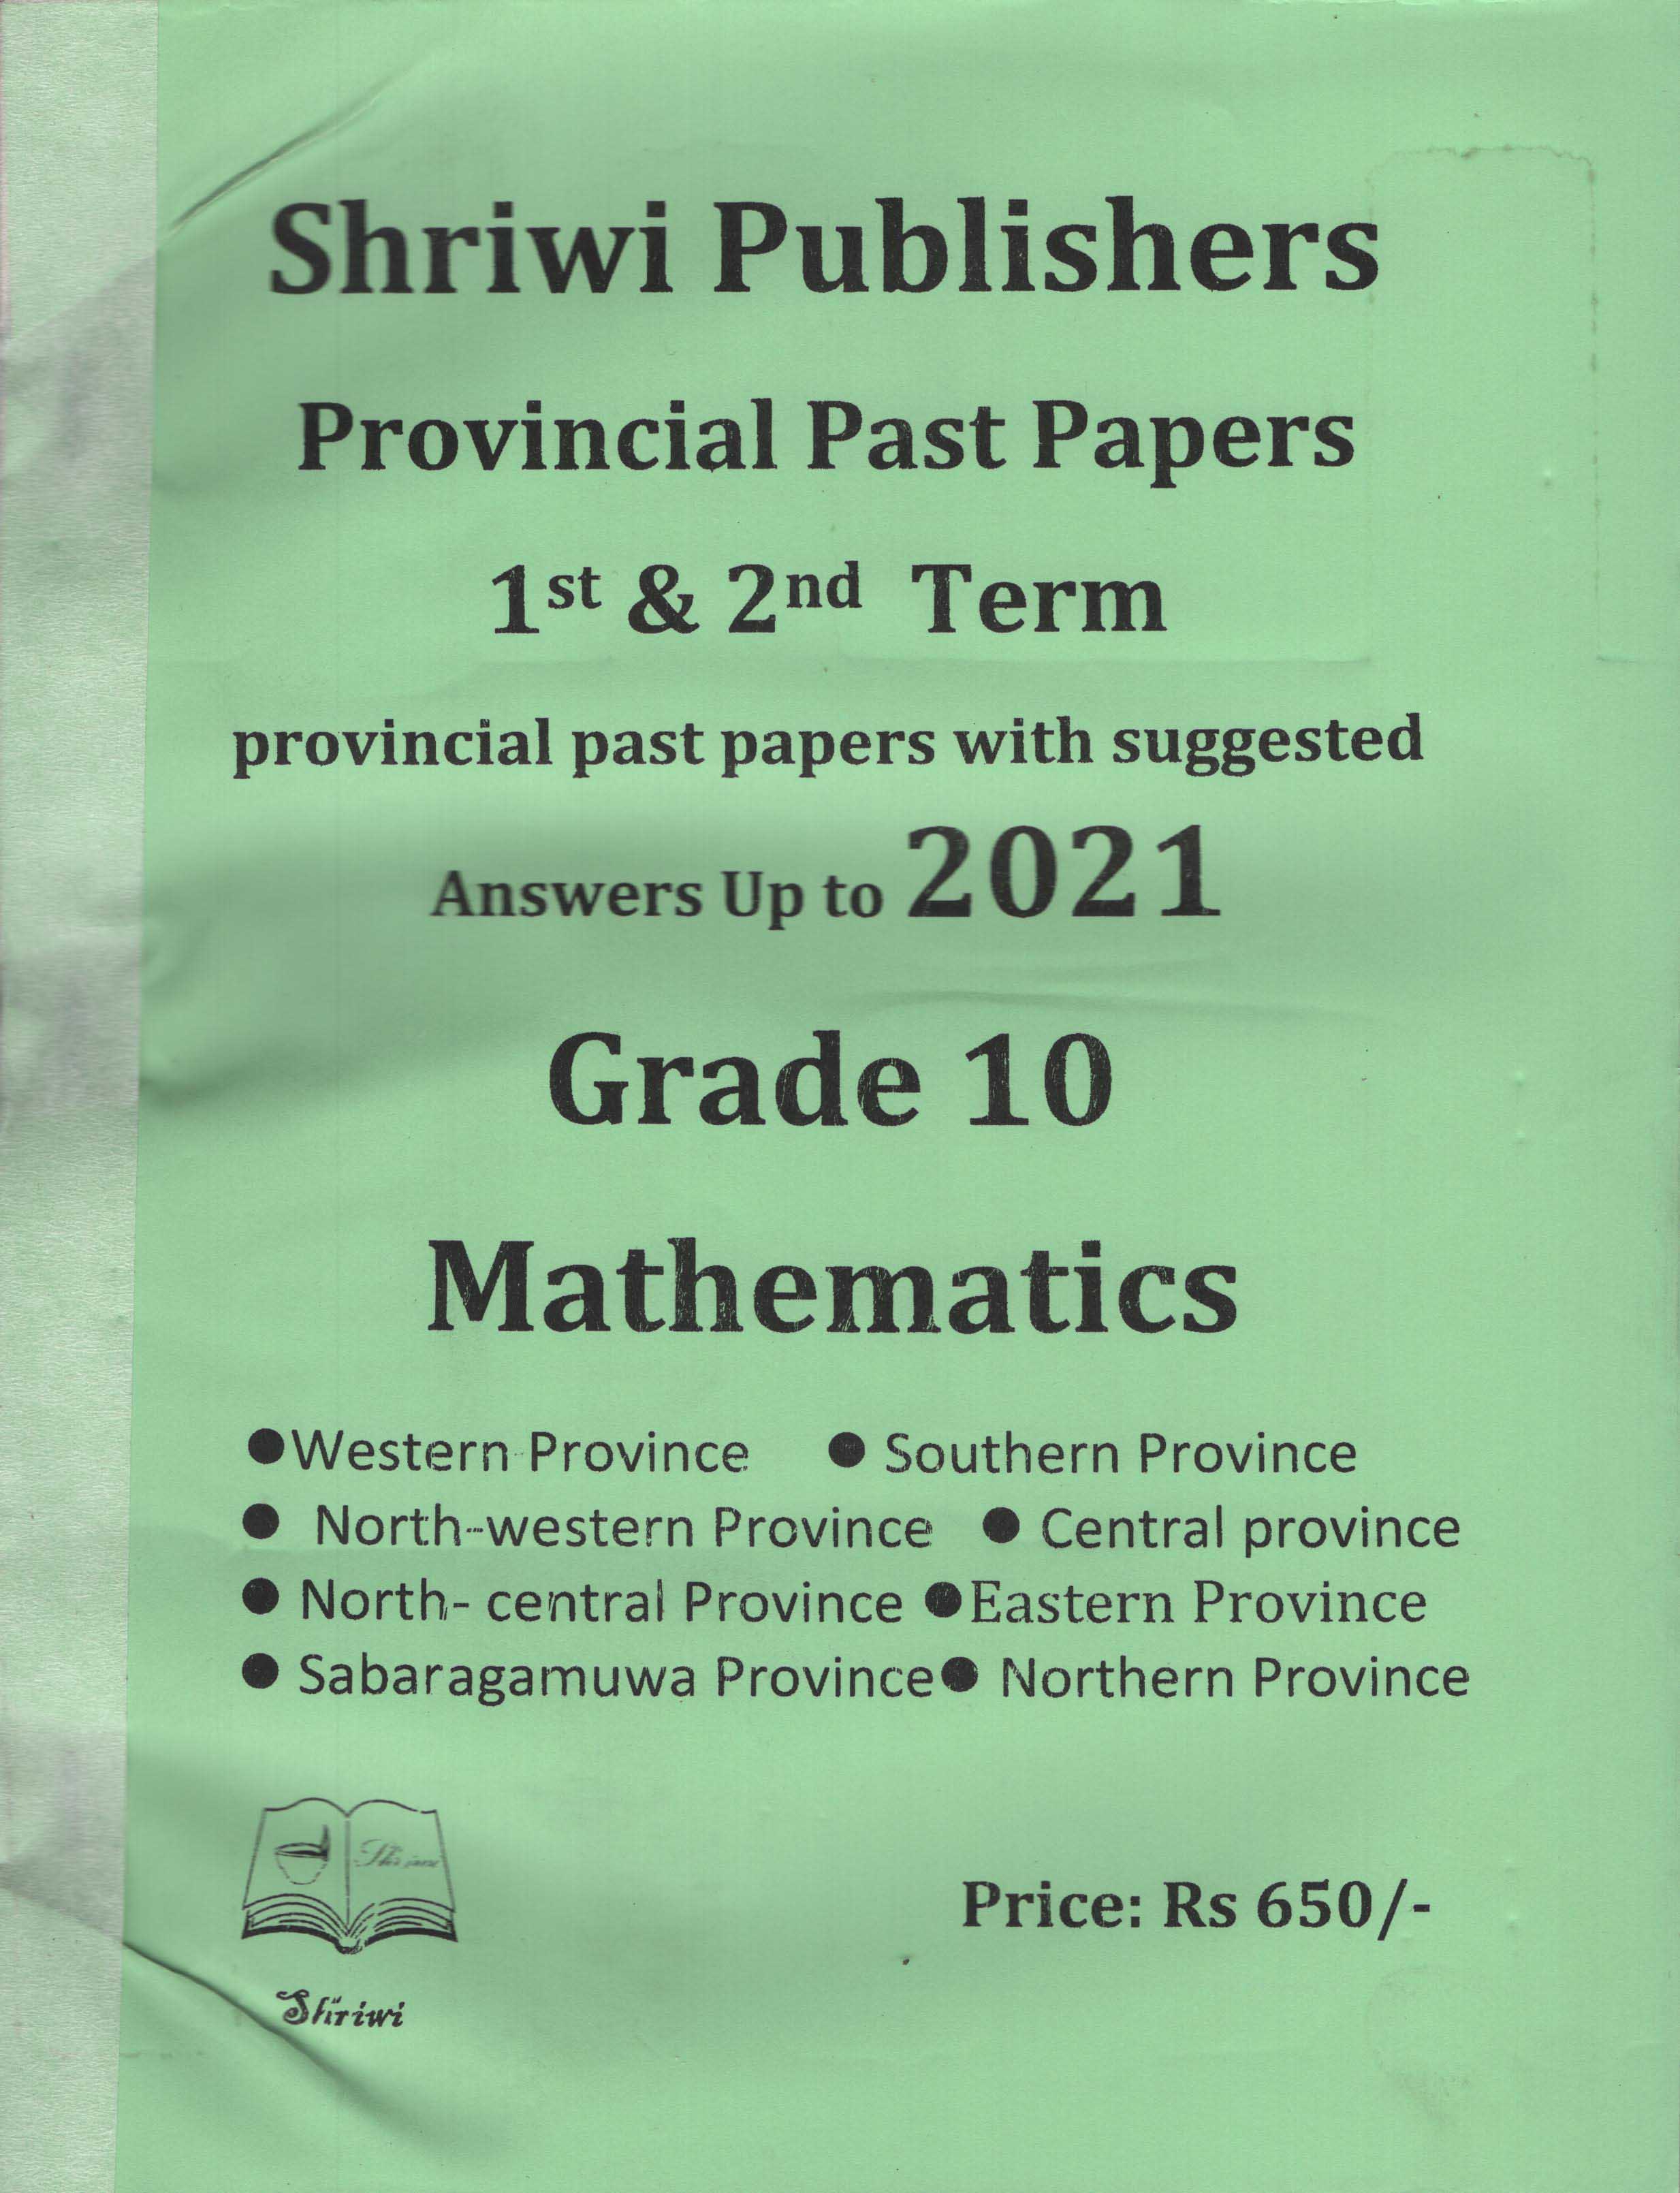 Shriwi Grade 10 Mathematics Provincial Past Papers 3rd Term  with Suggested Answers Up to 2022